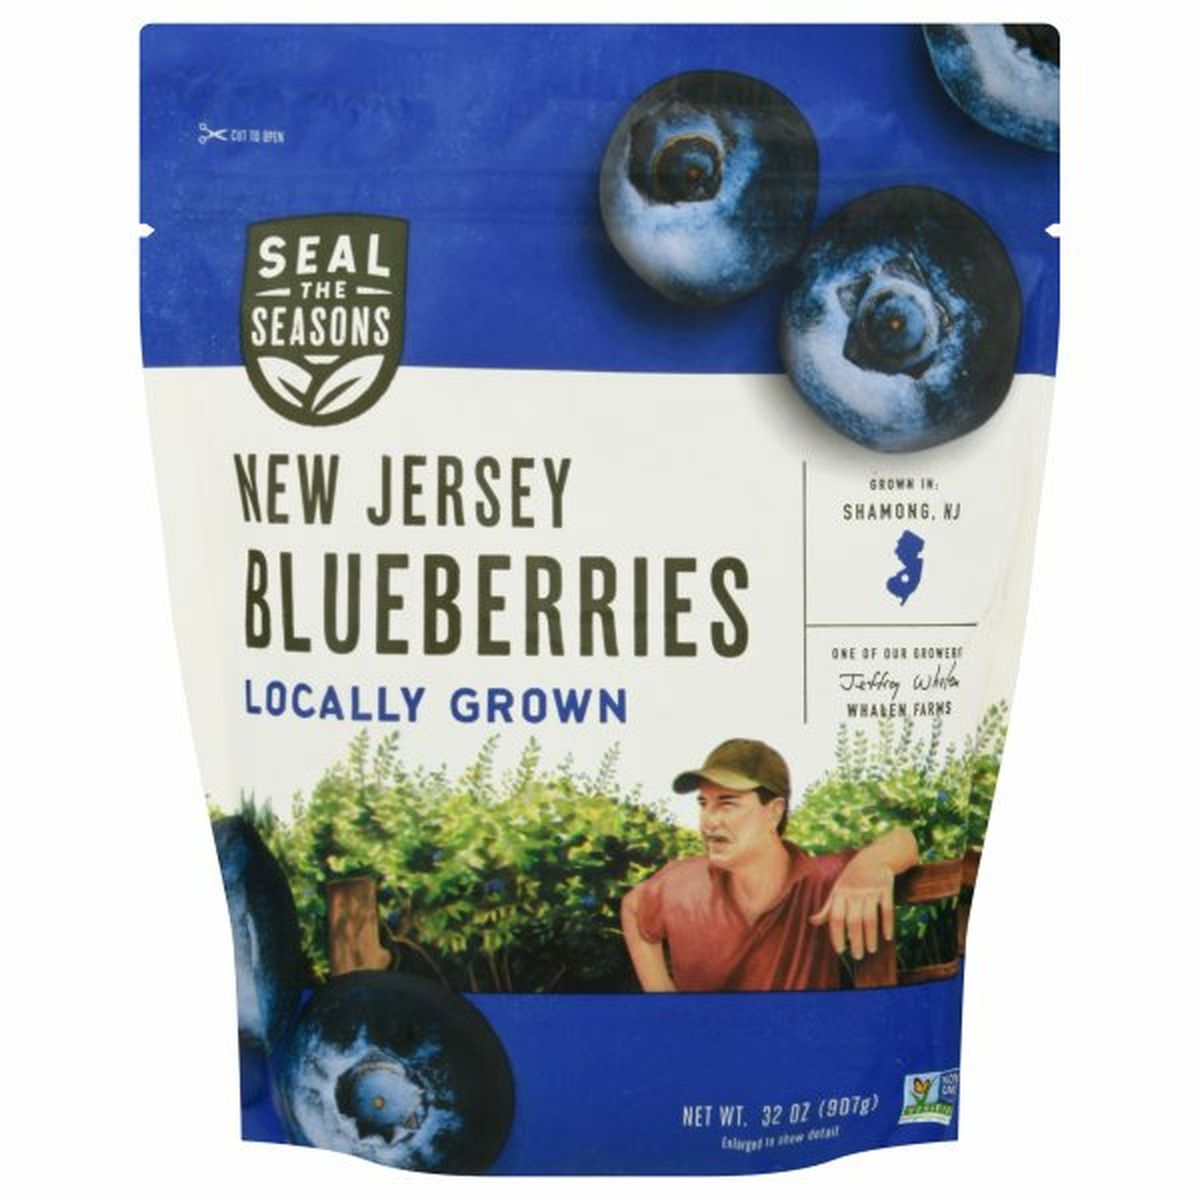 Calories in Seal The Seasons Blueberries, New Jersey